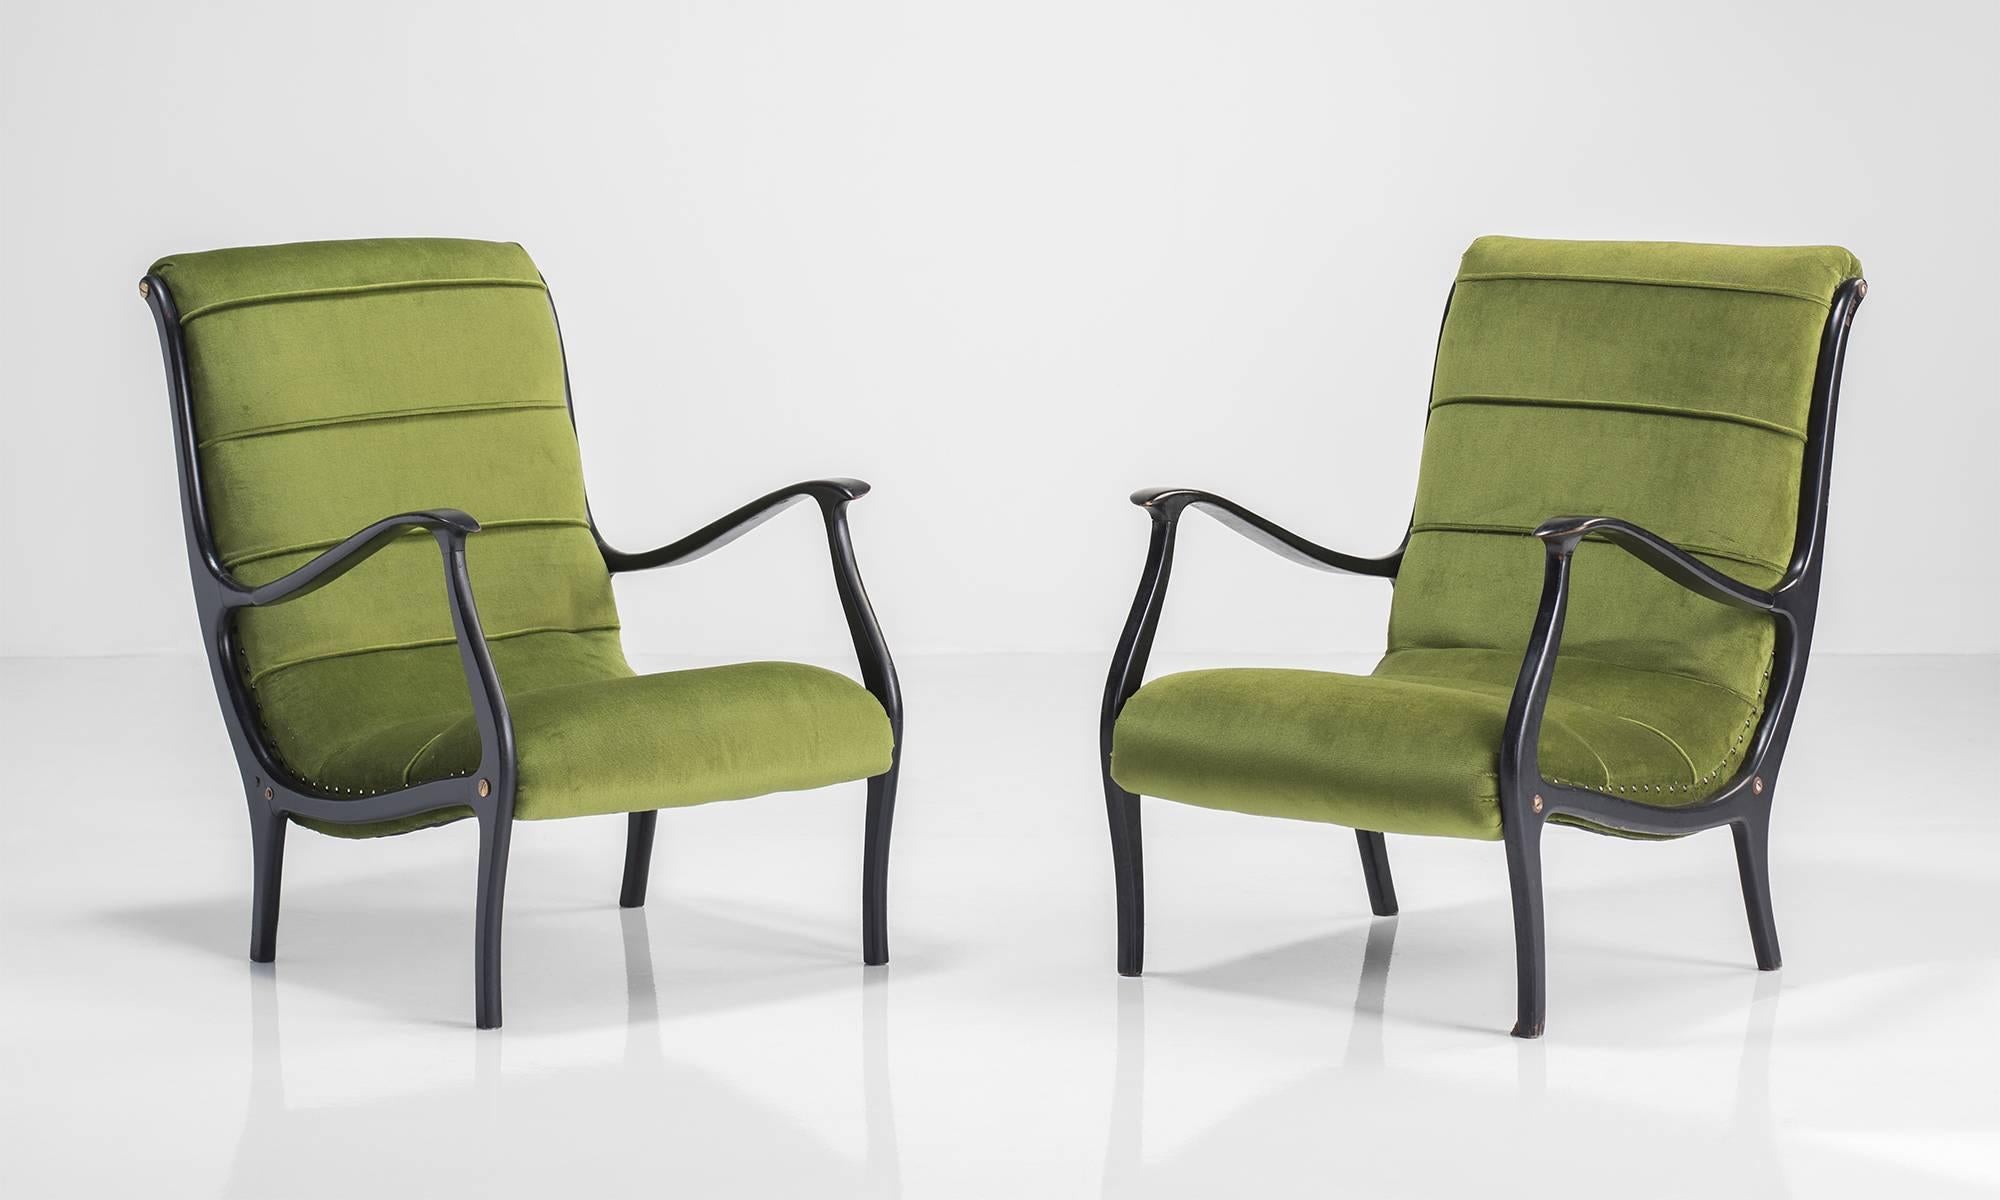 Ezio Longhi bentwood armchairs, circa 1960.

Bentwood armchairs with original velvet upholstery, designed by Ezio Longhi for Elam.